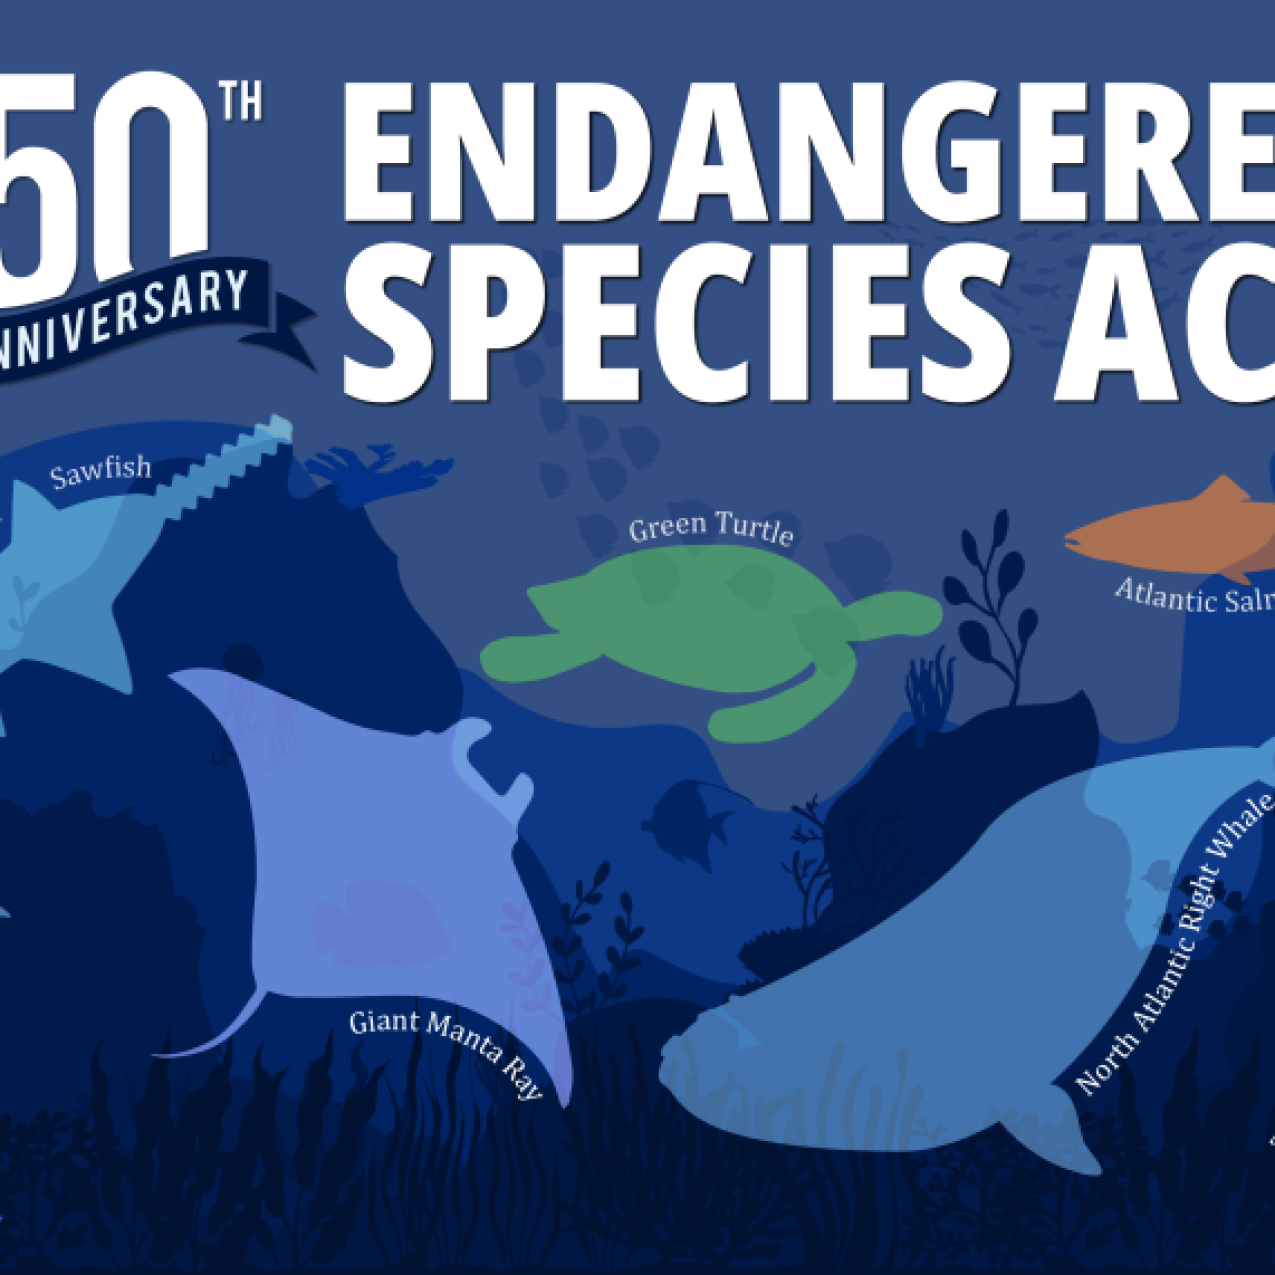 Illustration showing varying fish species celebrating 50 years of the Endangered Species Act.